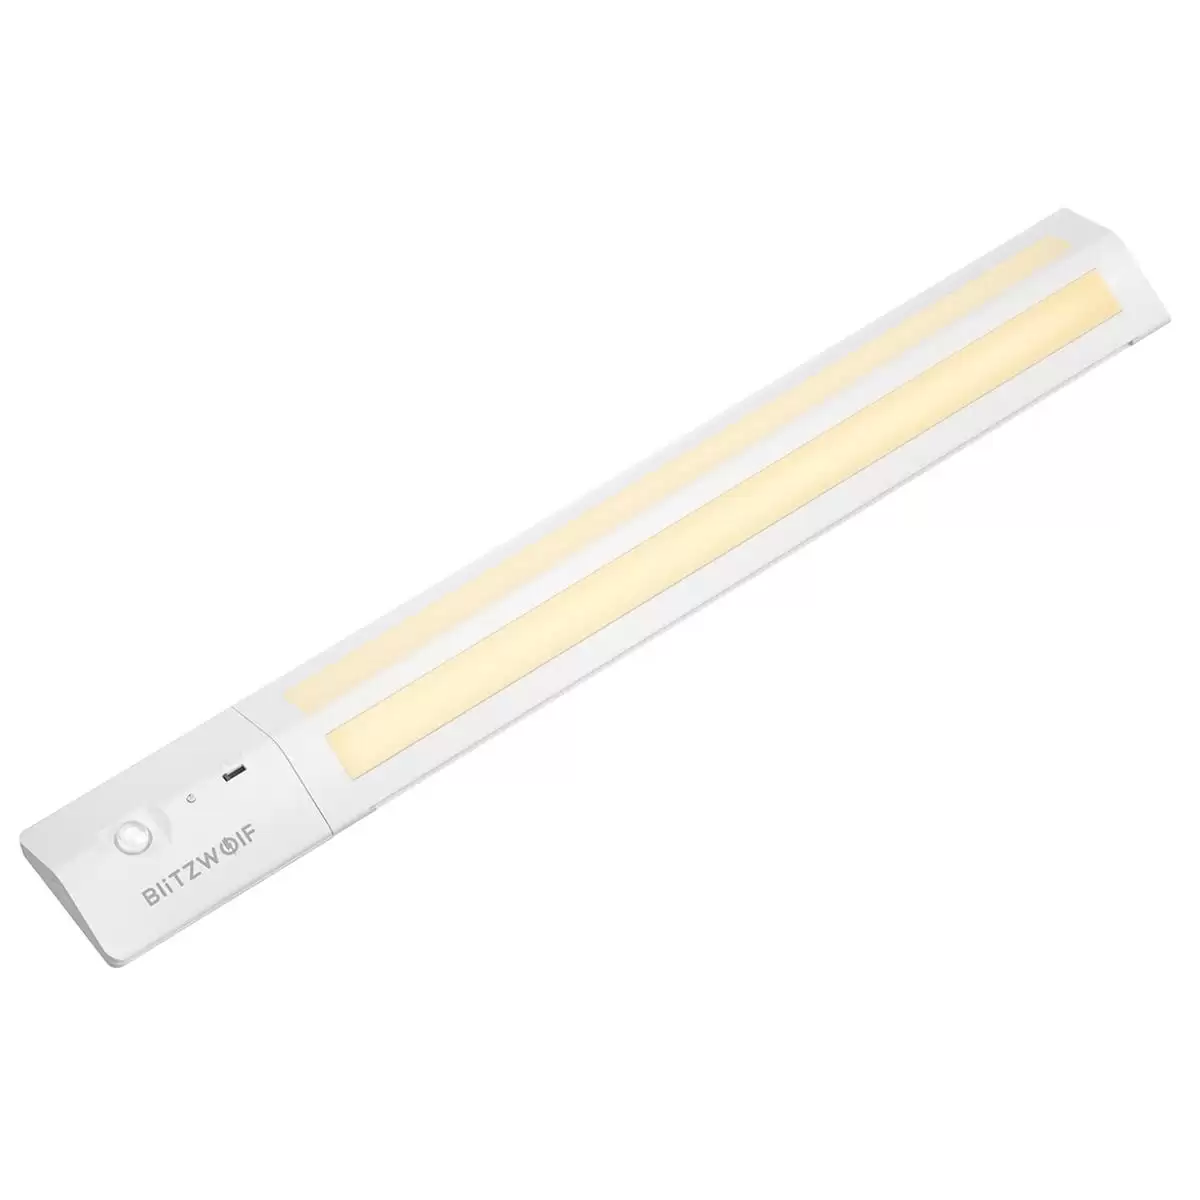 Order In Just $12.55 [upgrade Version] Blitzwolf Bw-lt8 Pir Light Motion Sensor Led Cabinet Light Removable Lithium Battery 3000k Color Temperature For Bathroom Bedroom Storage Room Stick-on Stairs Step Light Bar - Warm White With This Coupon At Banggood